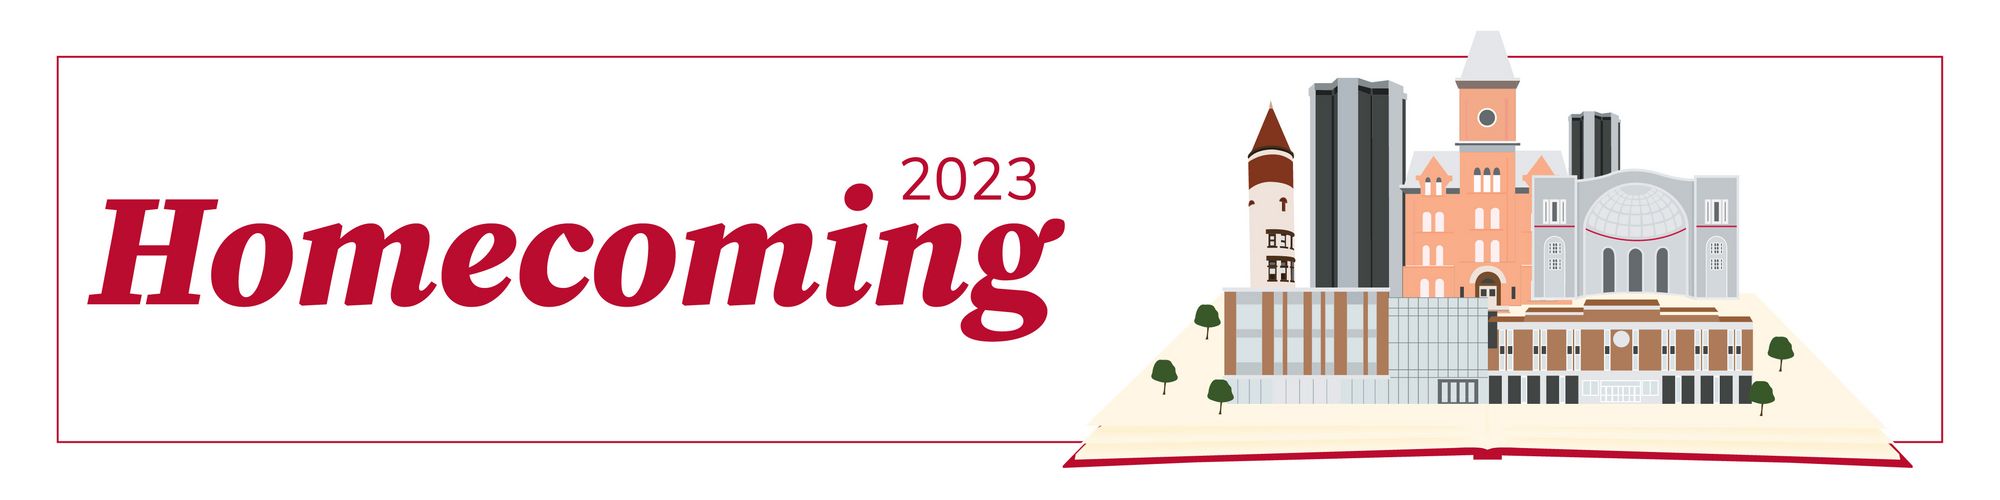 Homecoming 2023 graphic with College of Nursing buildings and an open book